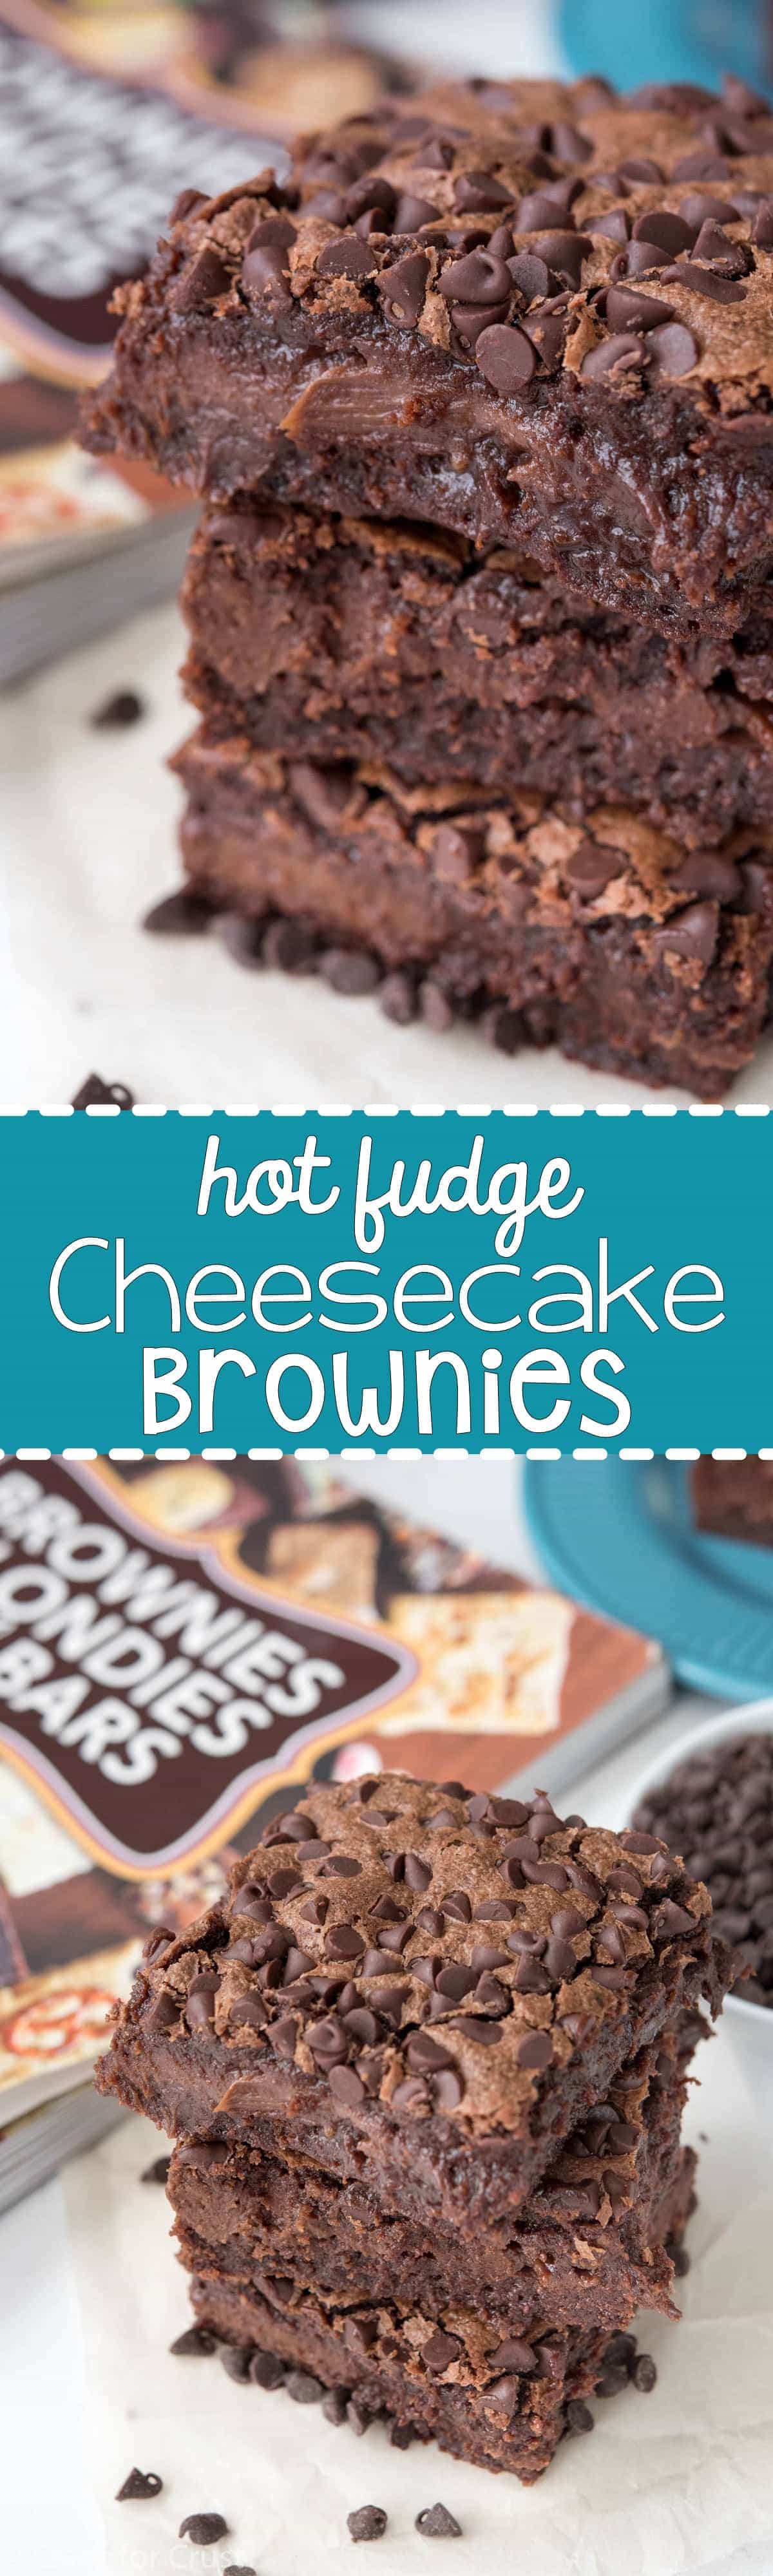 Hot Fudge Cheesecake Brownies - a decadent brownie filled with hot fudge cheesecake. This easy recipe is perfect for chocolate lovers!